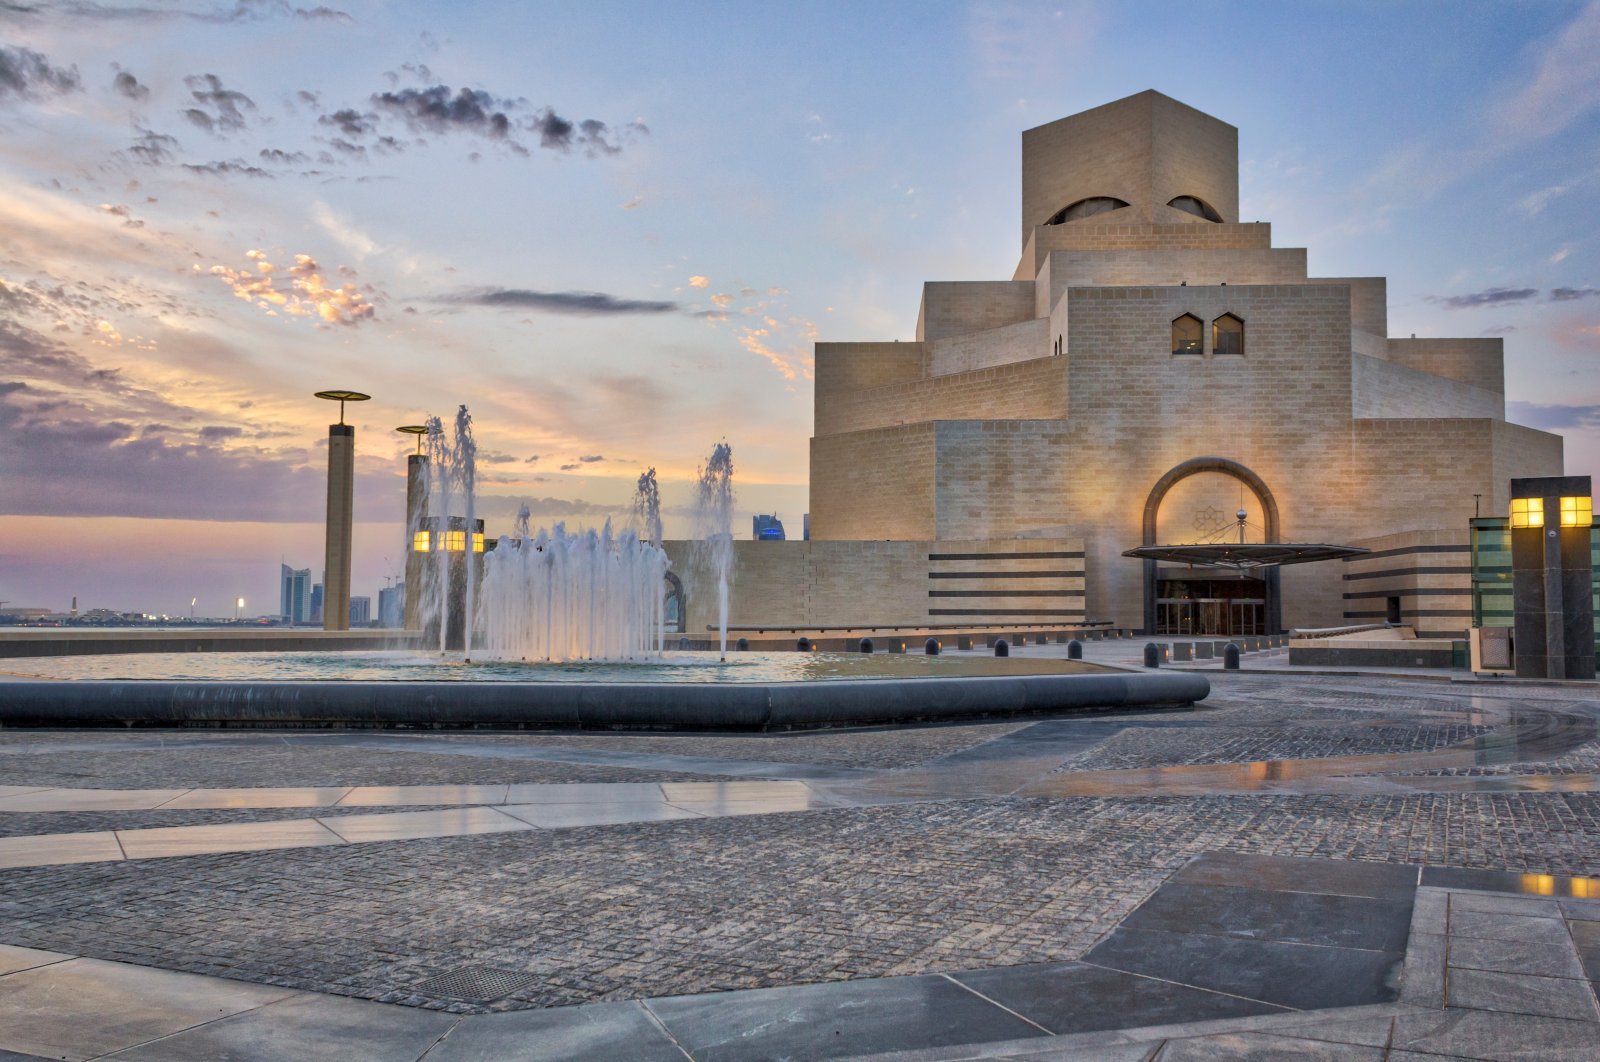 Doha,Qatar-April 28,2013 :Museum of Islamic Art , Doha,Qatar in daylight exterior view with fountain in foreground and clouds in the sky in the background